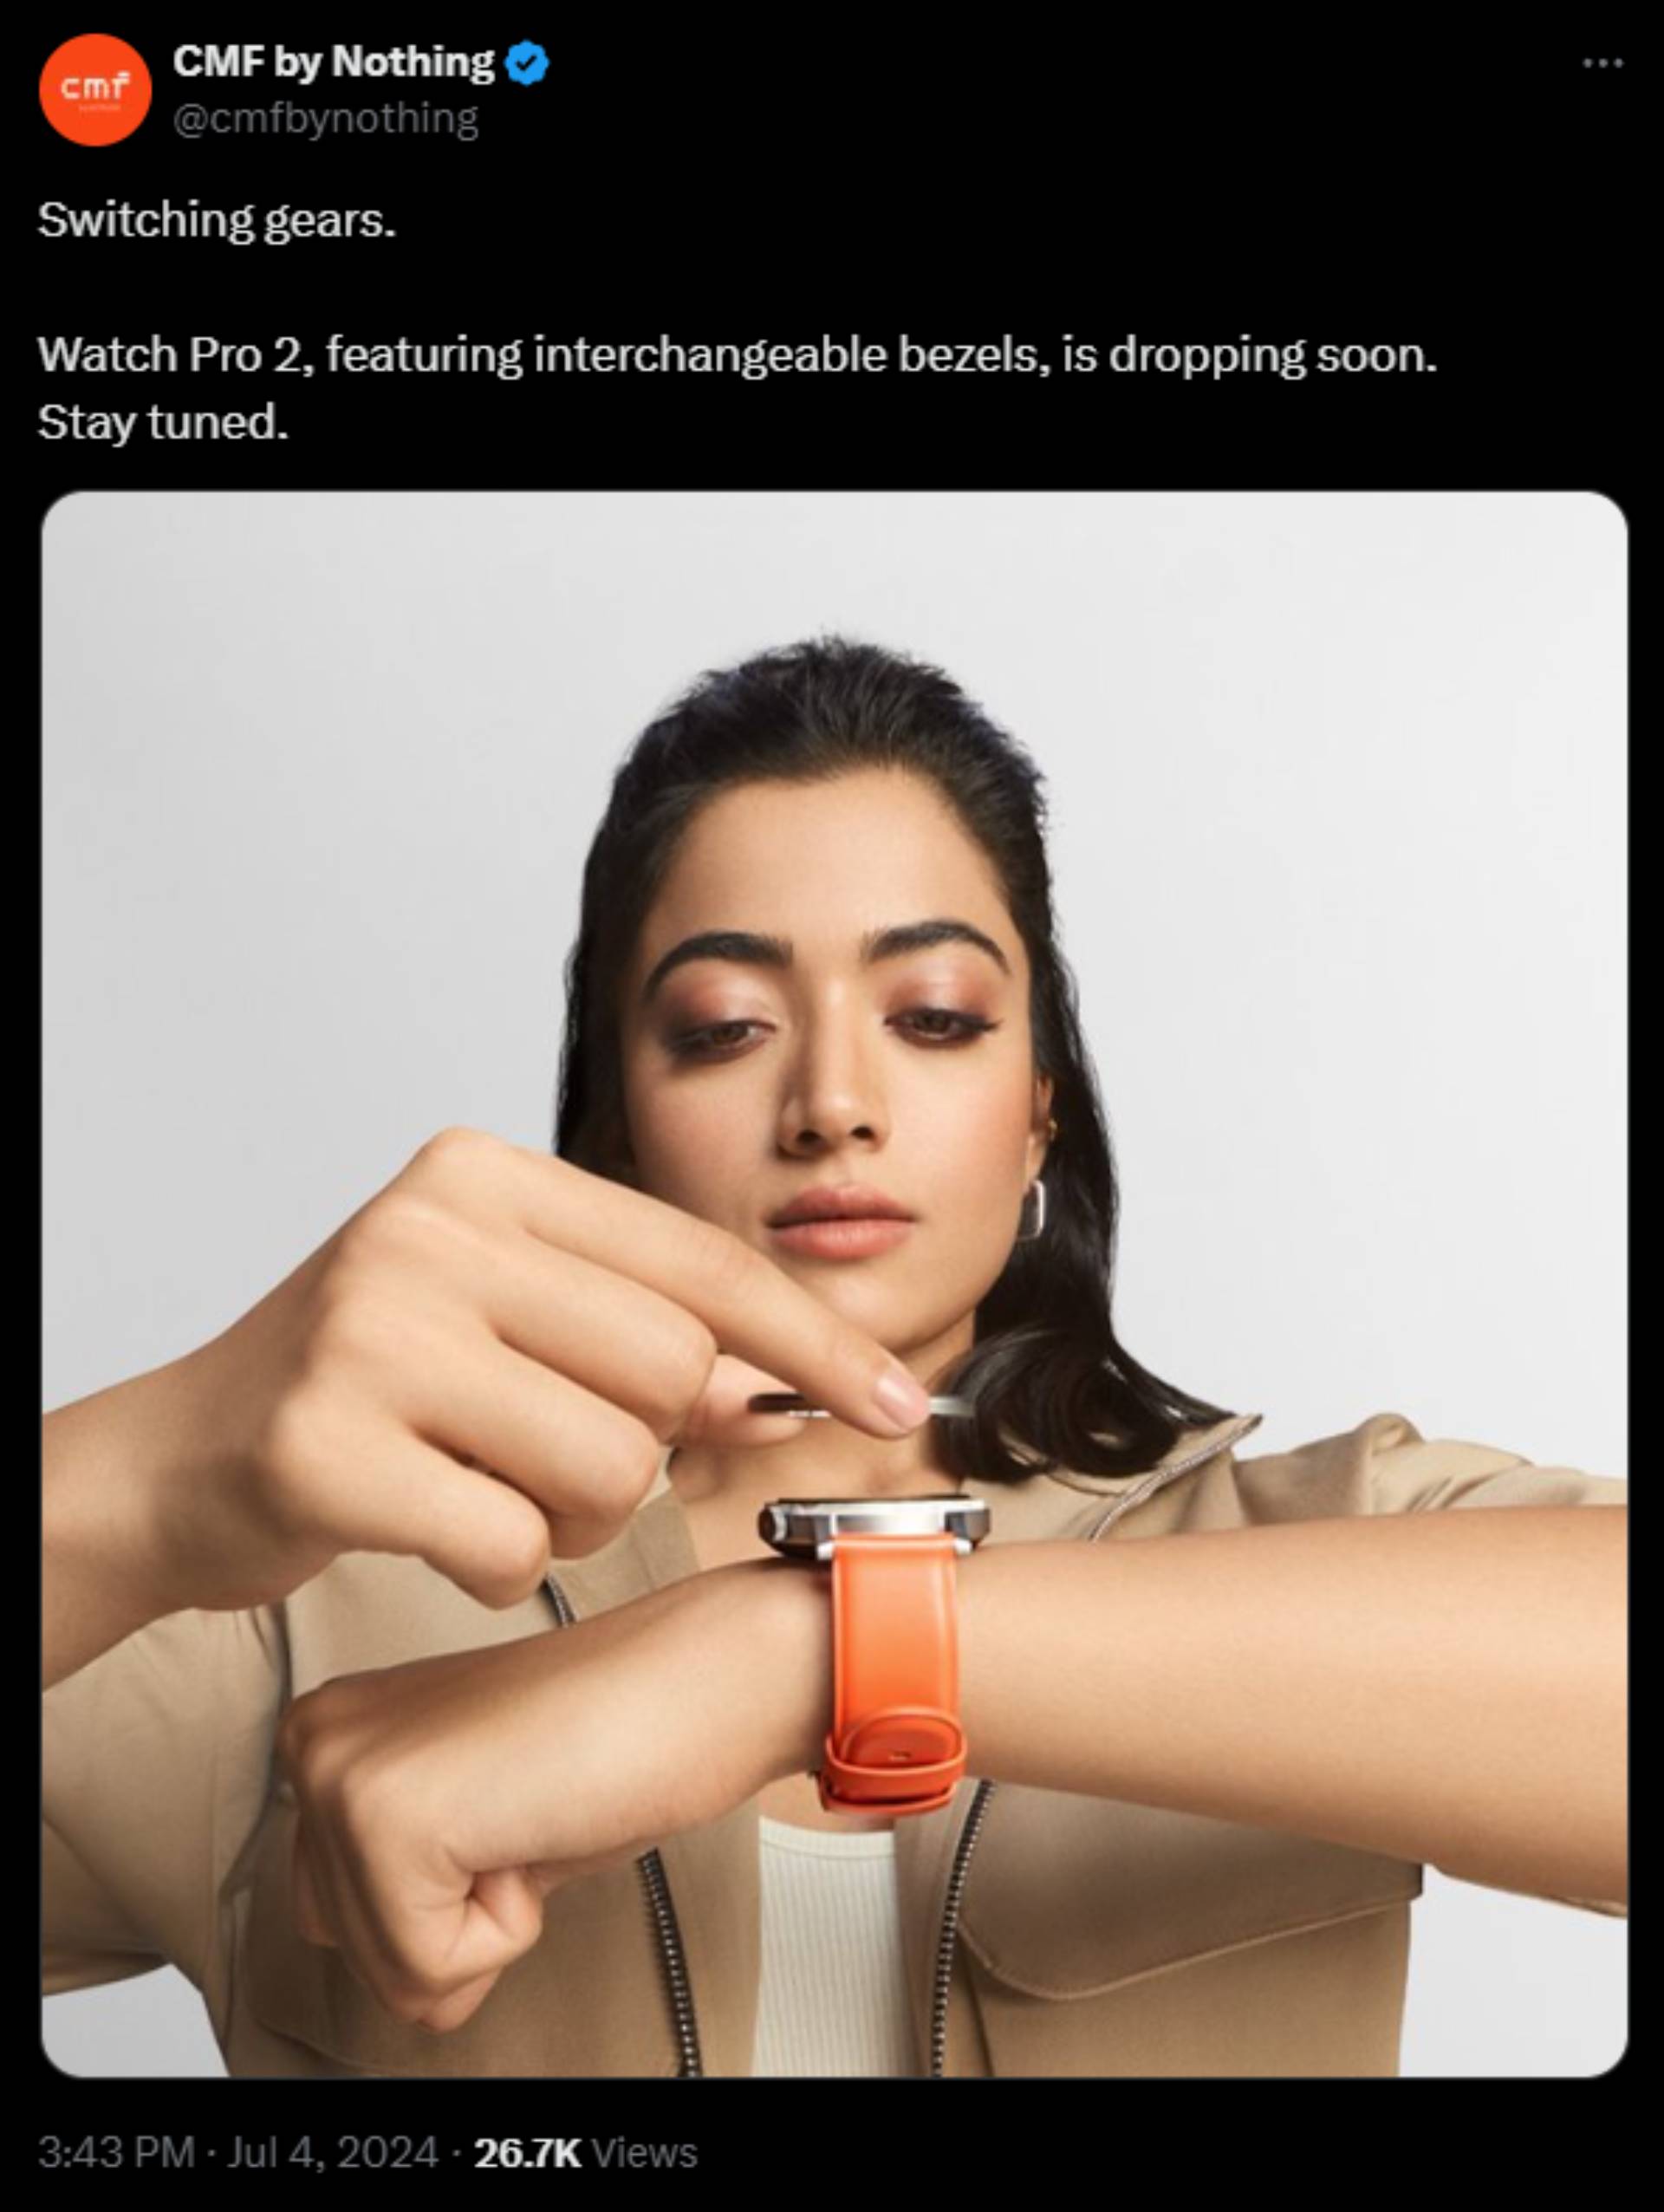 Screenshot of CMF by Nothing's X post showing the Watch Pro 2's interchangeable bezel.